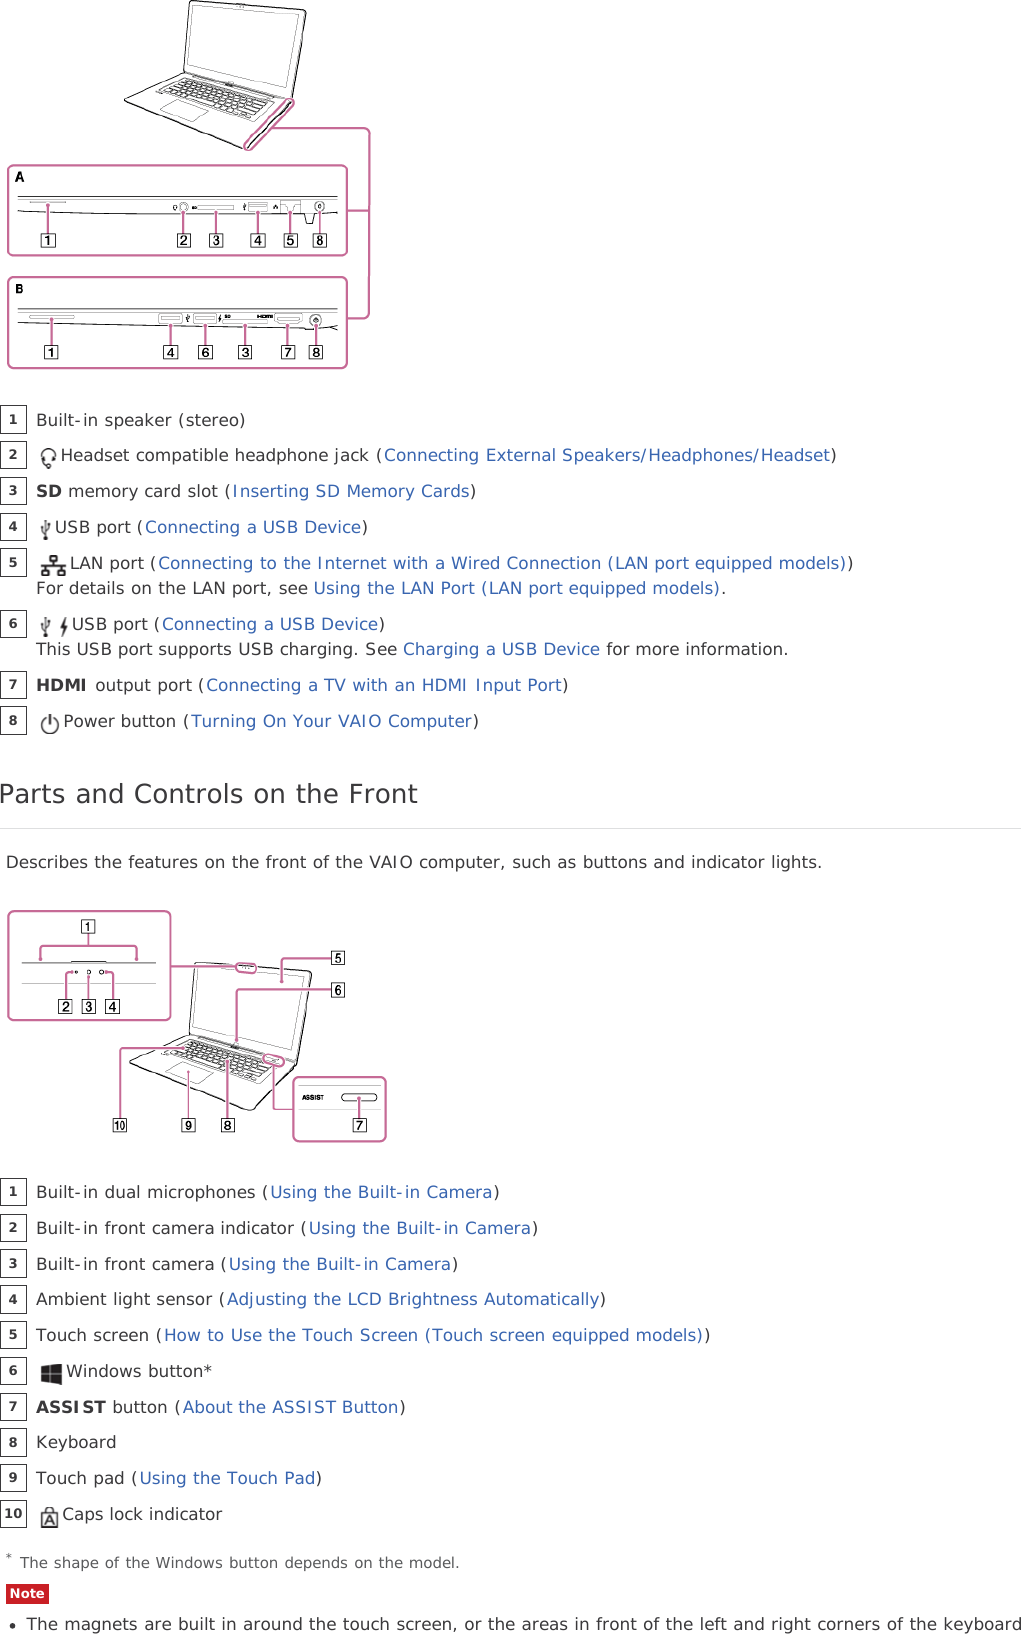 Parts and Controls on the FrontDescribes the features on the front of the VAIO computer, such as buttons and indicator lights.* The shape of the Windows button depends on the model.NoteThe magnets are built in around the touch screen, or the areas in front of the left and right corners of the keyboardBuilt-in speaker (stereo)1Headset compatible headphone jack (Connecting External Speakers/Headphones/Headset)2SD memory card slot (Inserting SD Memory Cards)3USB port (Connecting a USB Device)4LAN port (Connecting to the Internet with a Wired Connection (LAN port equipped models))For details on the LAN port, see Using the LAN Port (LAN port equipped models).5USB port (Connecting a USB Device)This USB port supports USB charging. See Charging a USB Device for more information.6HDMI output port (Connecting a TV with an HDMI Input Port)7Power button (Turning On Your VAIO Computer)8Built-in dual microphones (Using the Built-in Camera)1Built-in front camera indicator (Using the Built-in Camera)2Built-in front camera (Using the Built-in Camera)3Ambient light sensor (Adjusting the LCD Brightness Automatically)4Touch screen (How to Use the Touch Screen (Touch screen equipped models))5Windows button*6ASSIST button (About the ASSIST Button)7Keyboard8Touch pad (Using the Touch Pad)9Caps lock indicator10